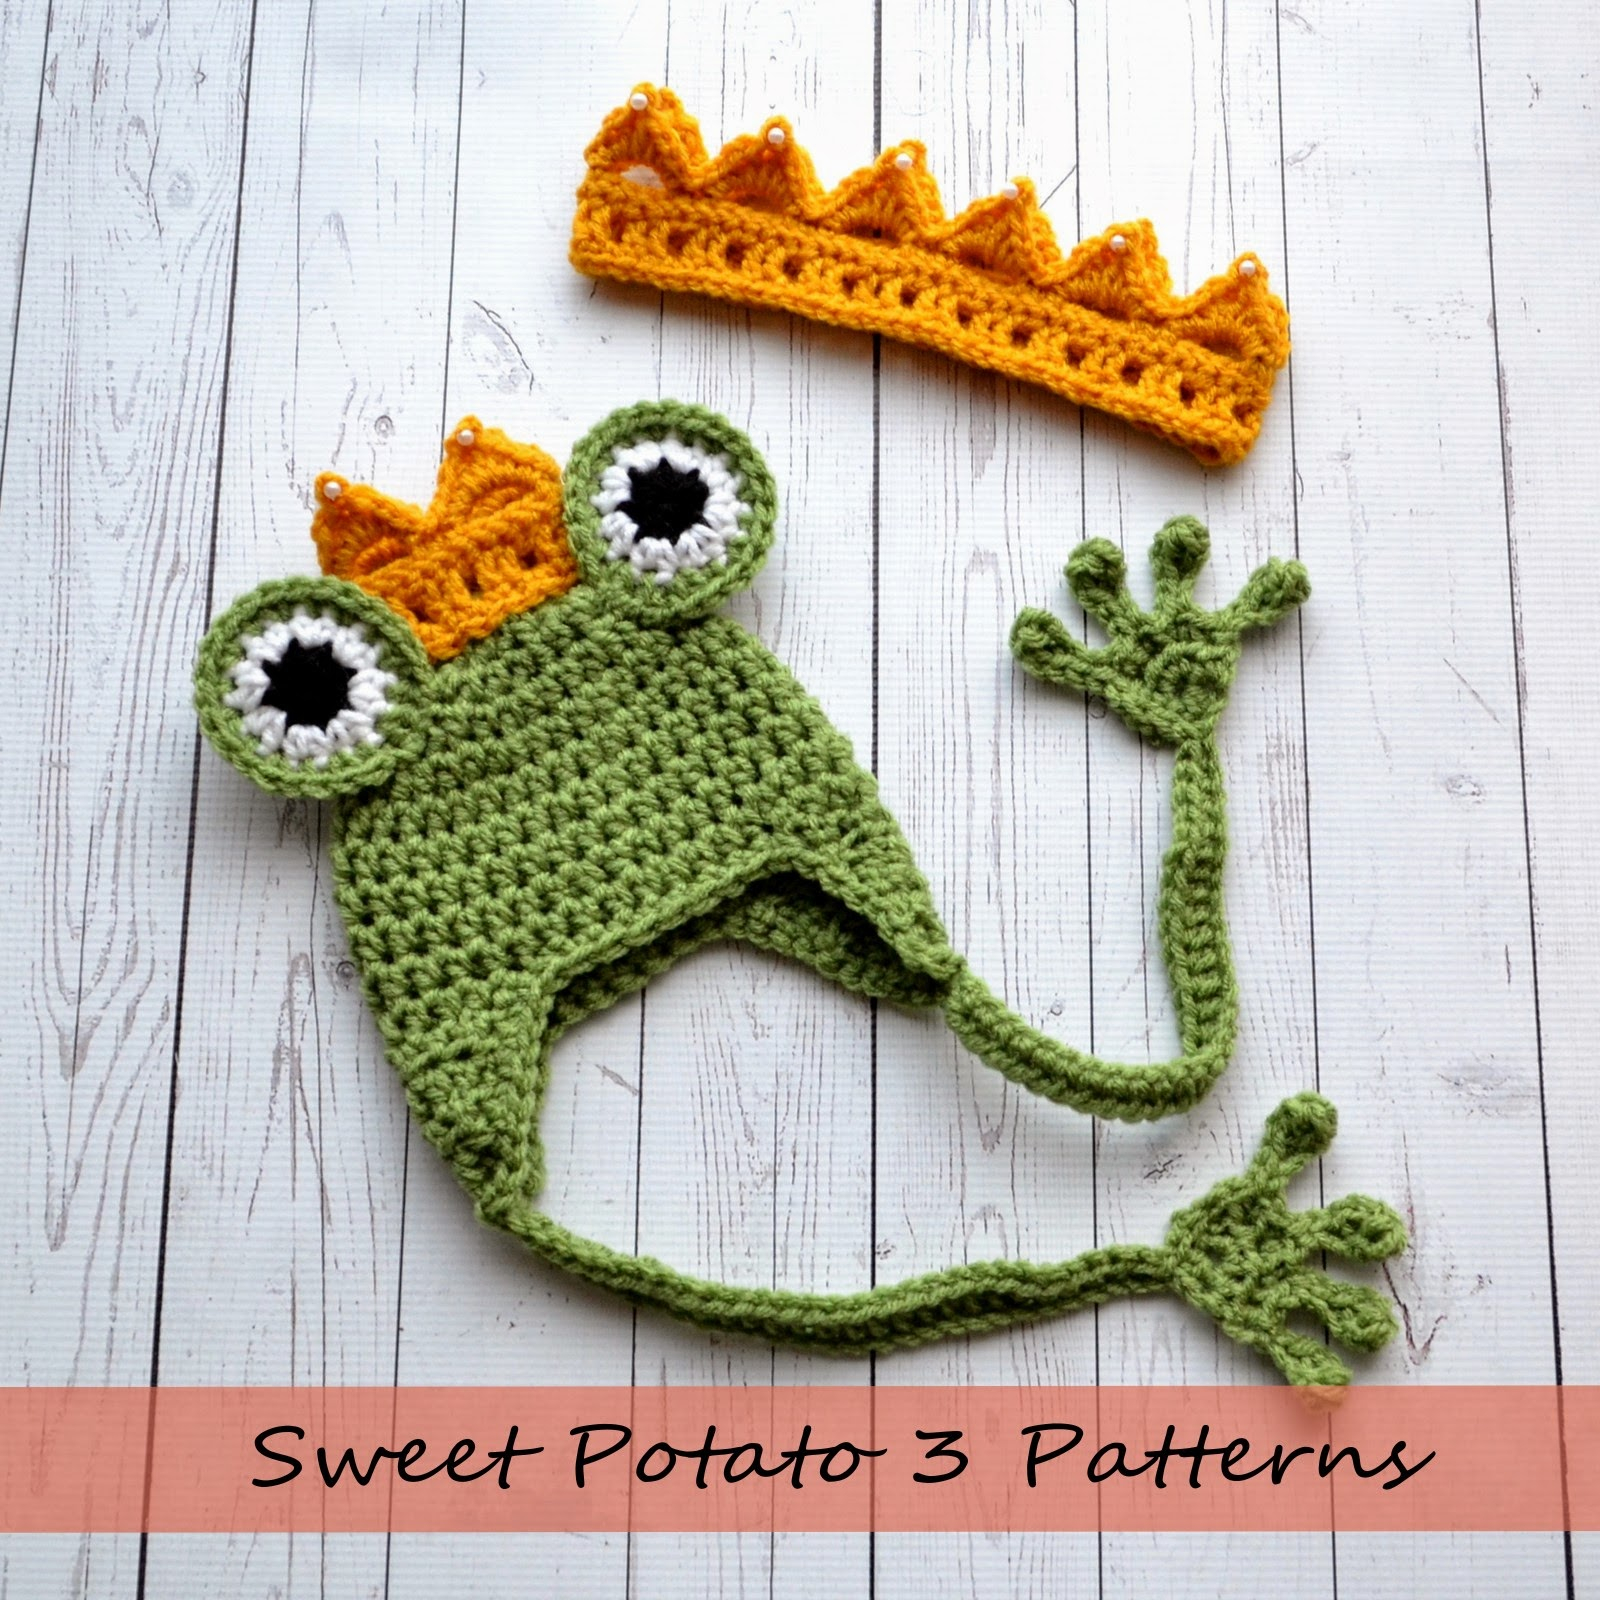 Frog Hat Knitting Pattern Princess And The Frog Crochet Pattern Release Sweet Potato 3